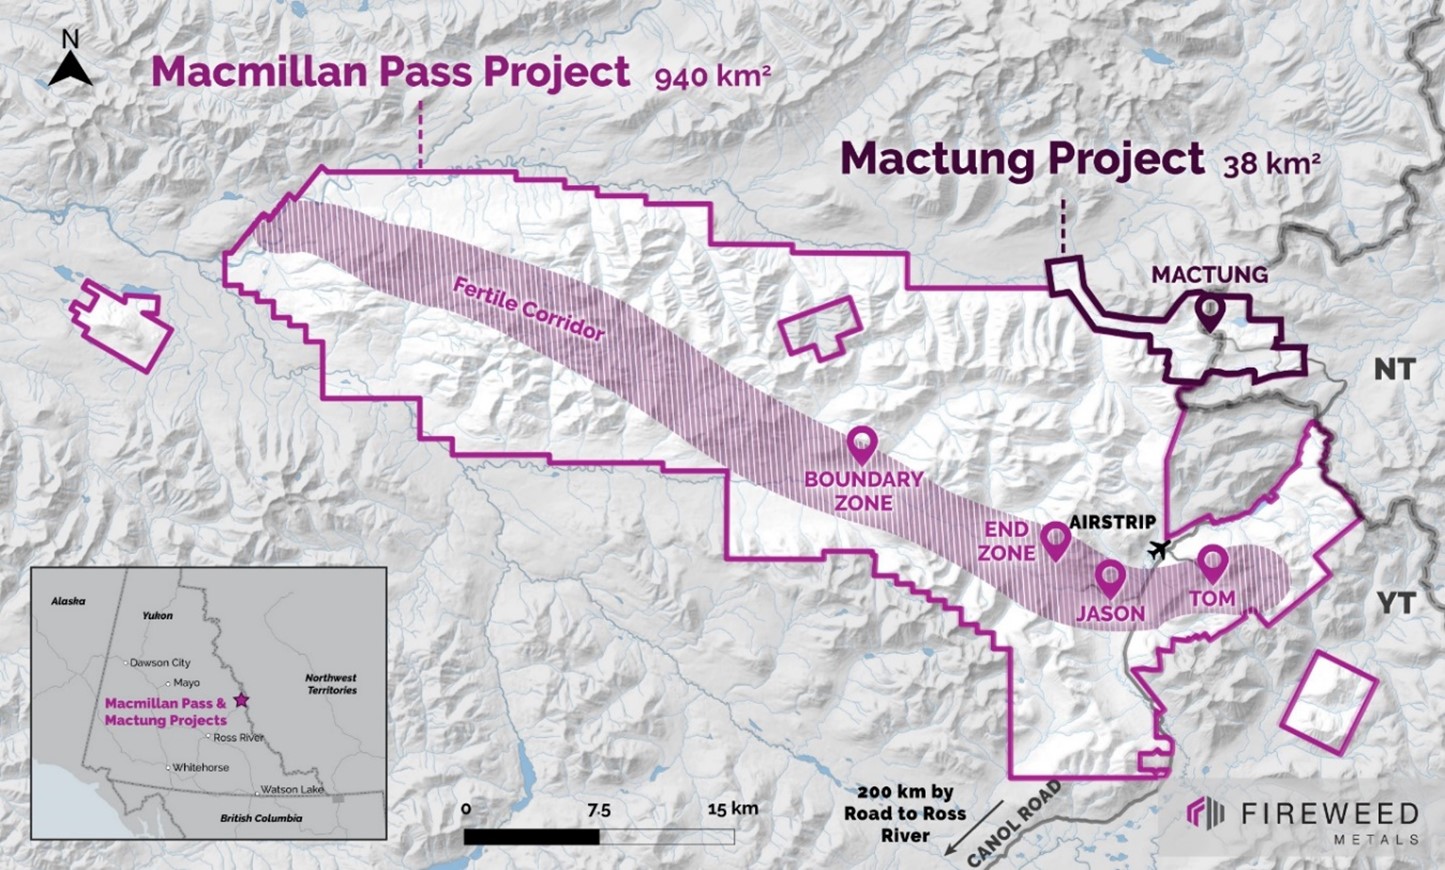 Map 1: Macmillan Pass Project and Mactung Project locations.